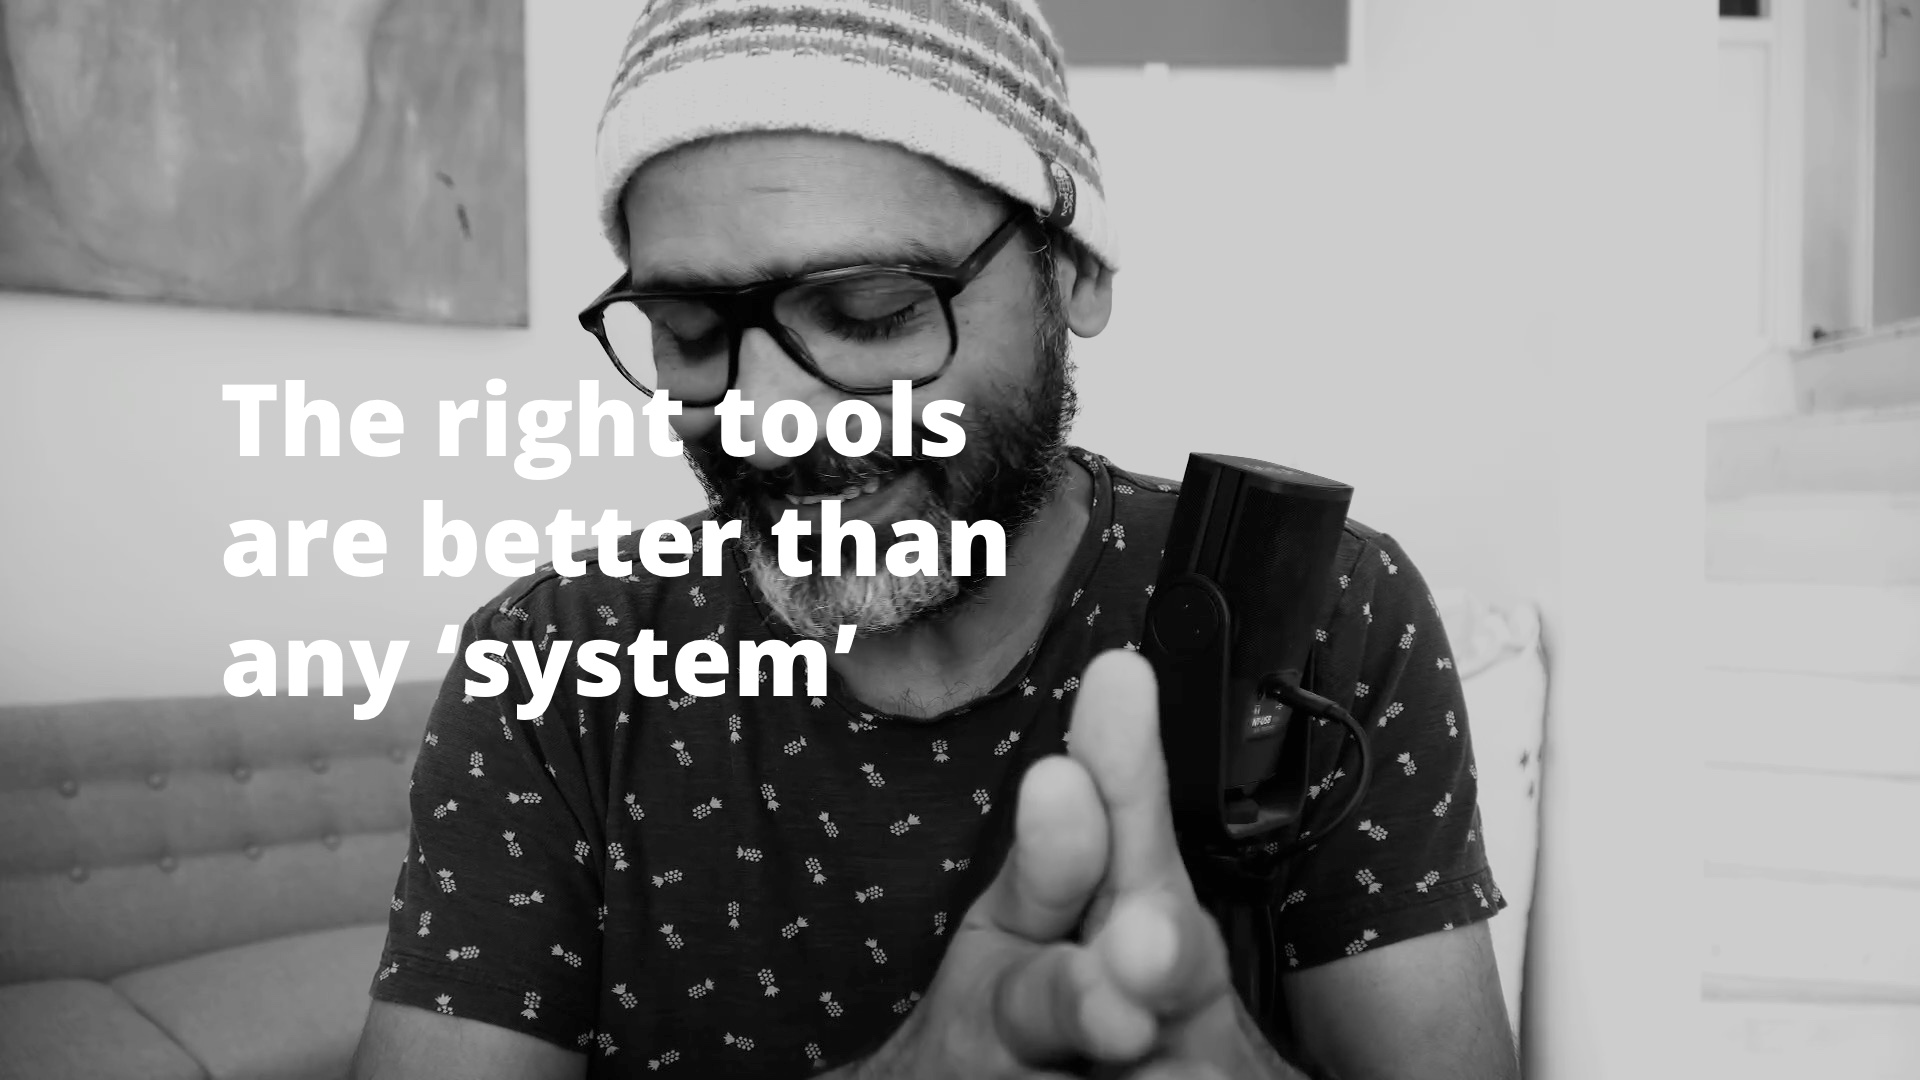 The right tools are better than any ‘system’